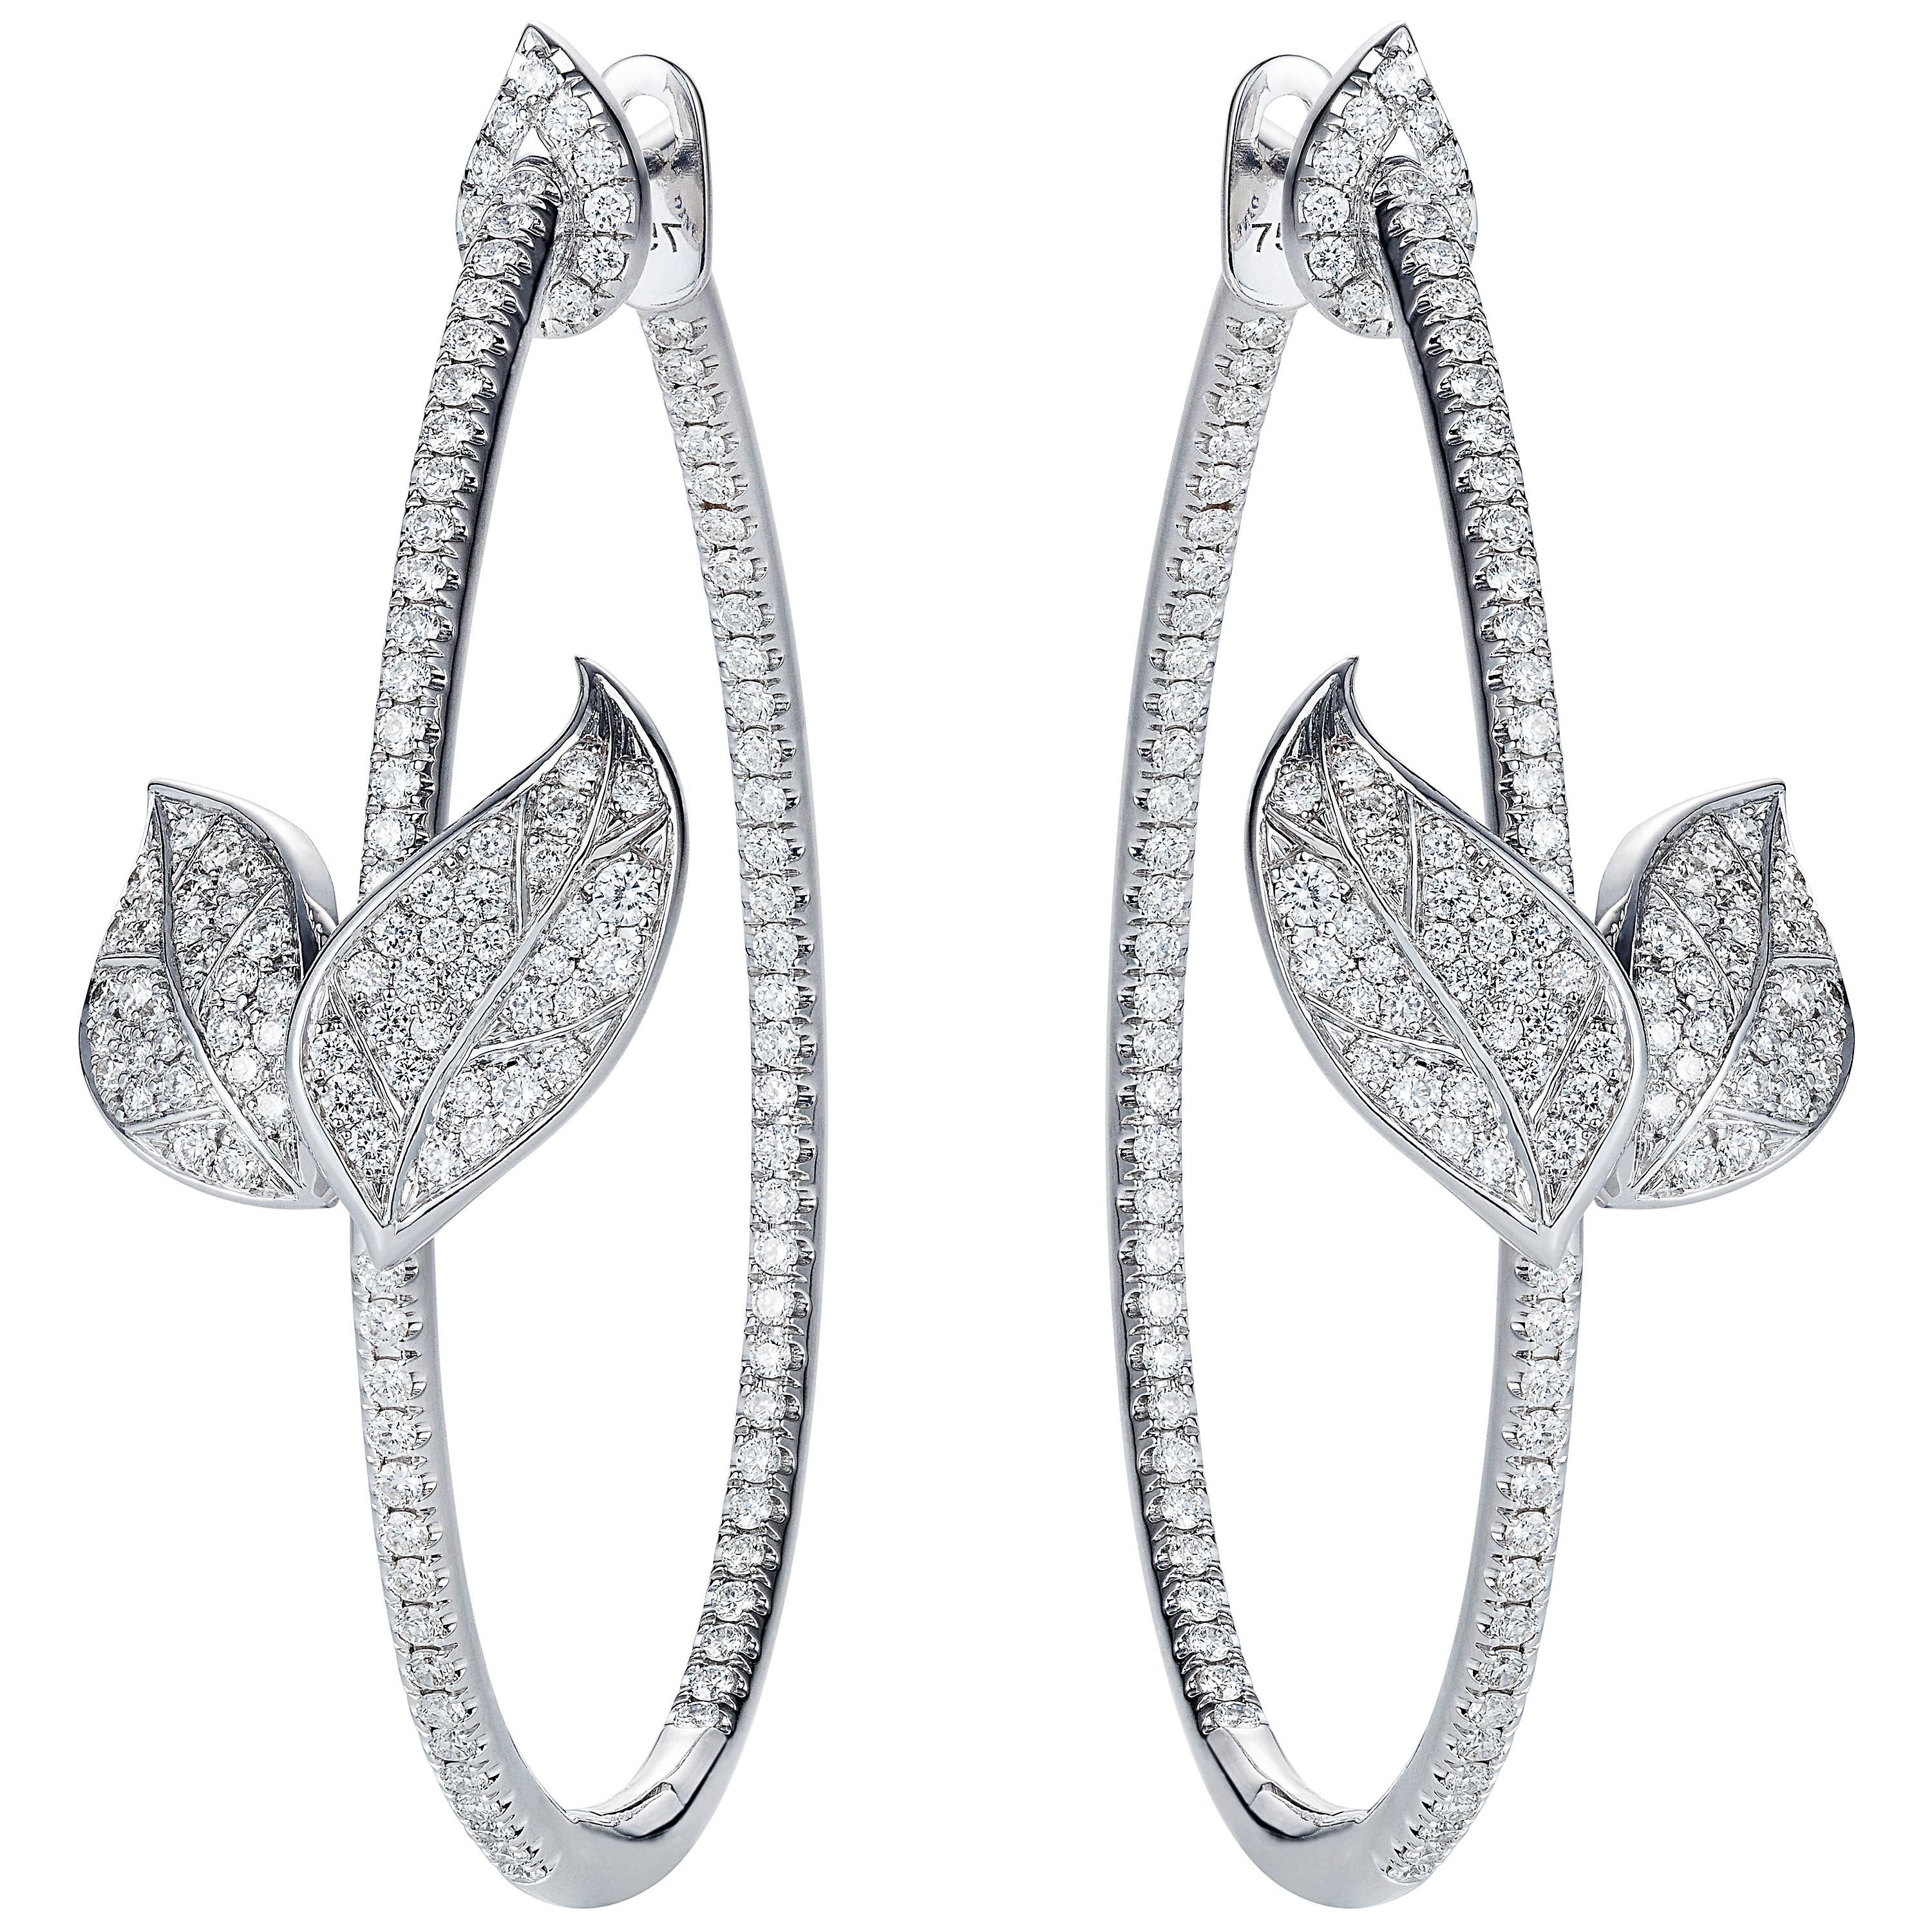 Nadine Aysoy Petite Feuilles 18 Karat White Gold and White Diamond Hoop Earrings For Sale